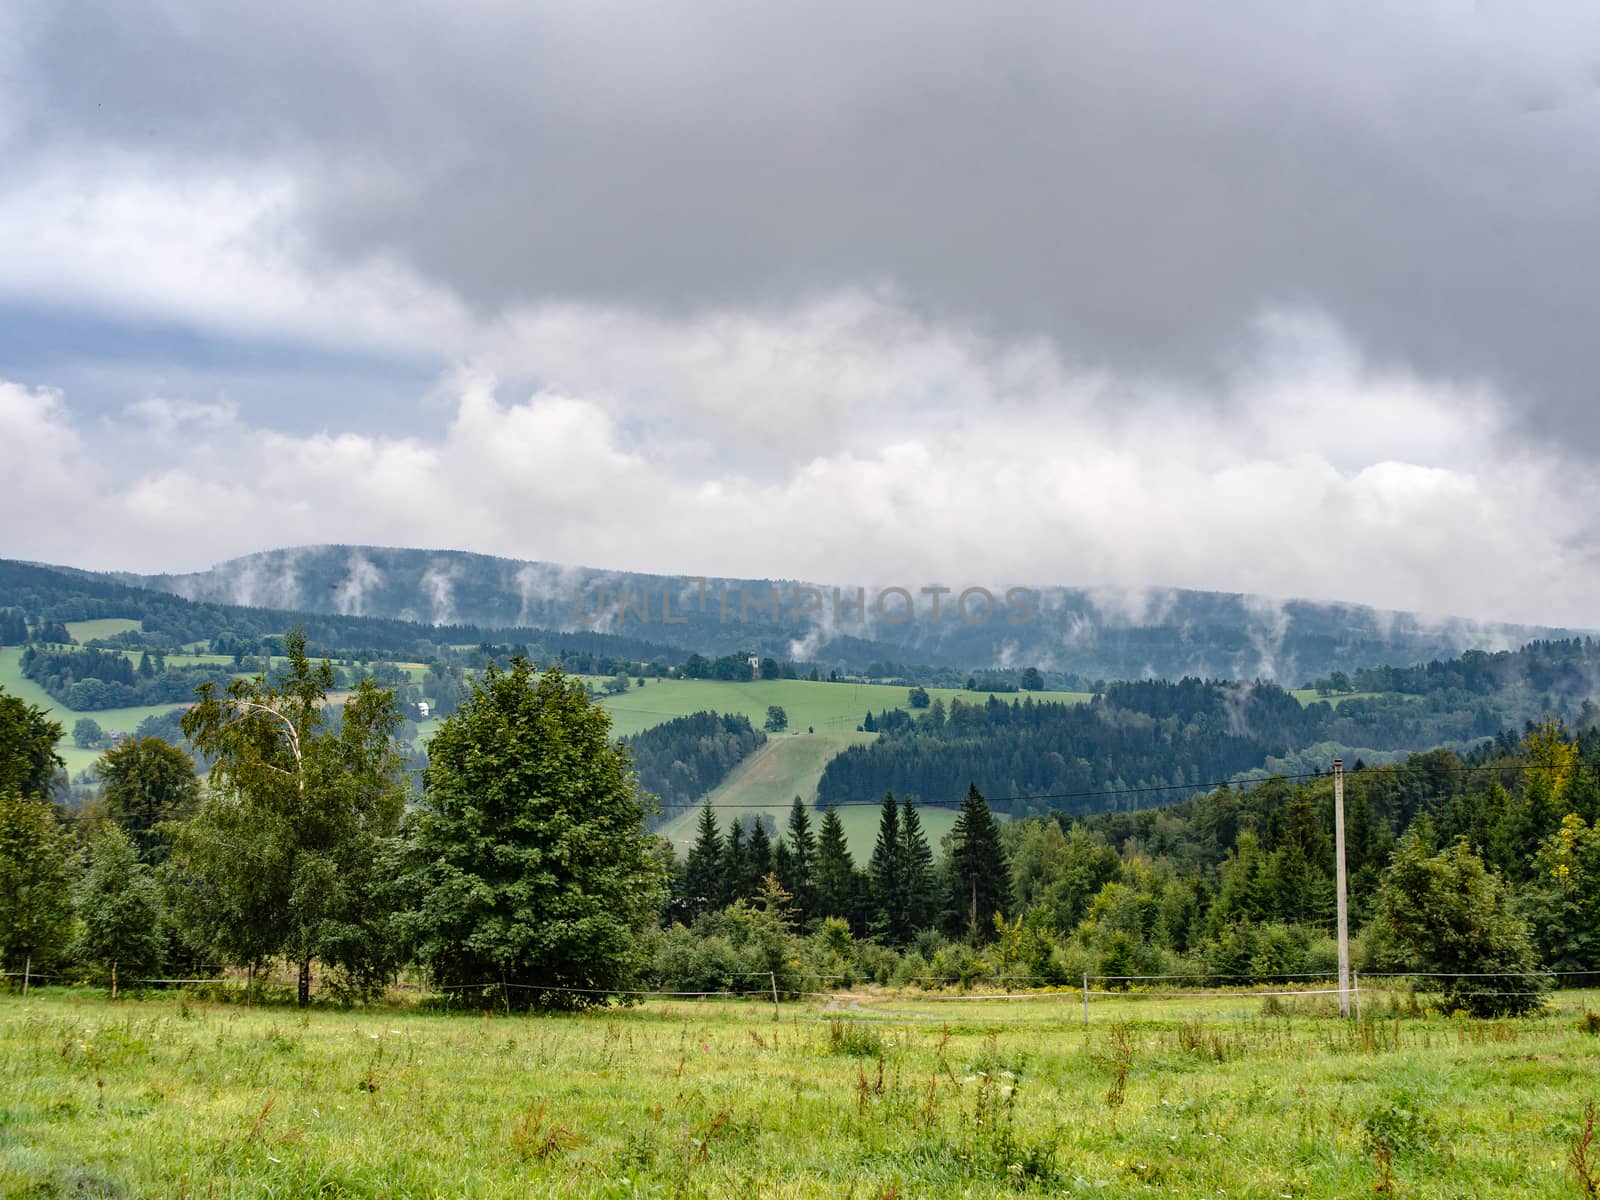 Natural cloudy misty landscape. mountain meadow and forests, both deciduous broadleaved and needle coniferous trees, electric overhead power line and horizon covered in clouds and mist, Czech republic, central Europe, Orlicke hory